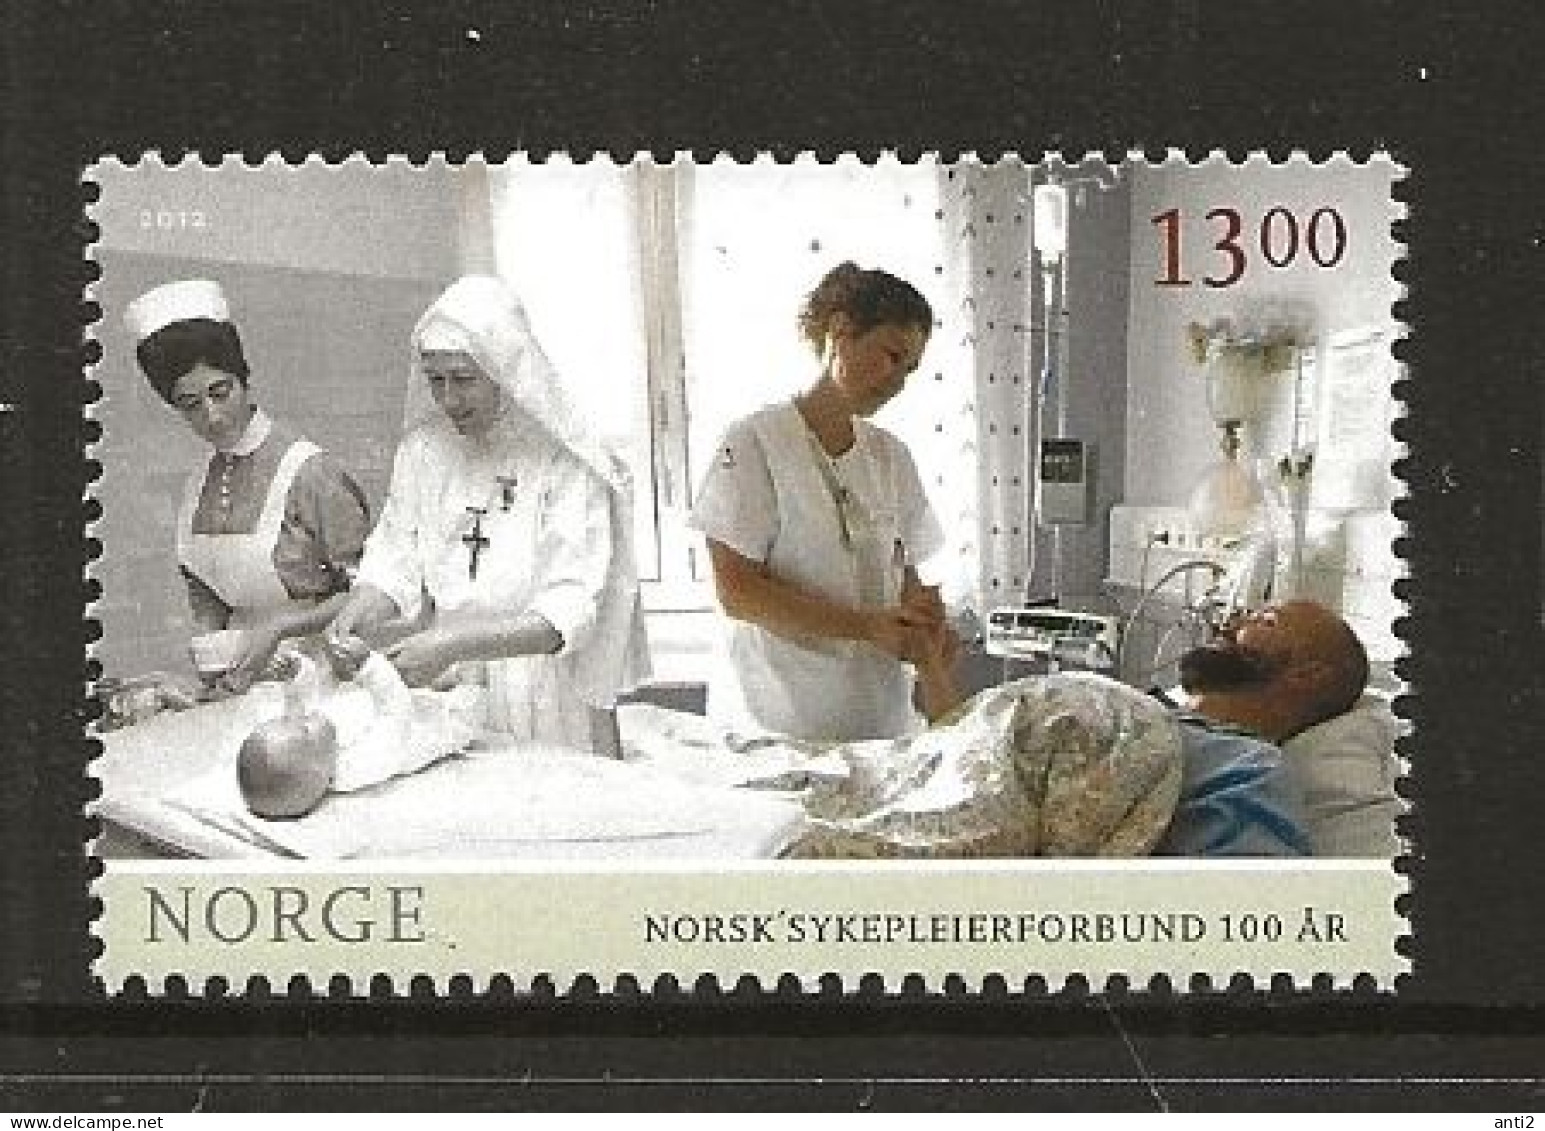 Norway Norge 2012 Centenary Of The Professional Association For Nursing Profession, Mi 1795  MNH(**) - Nuovi